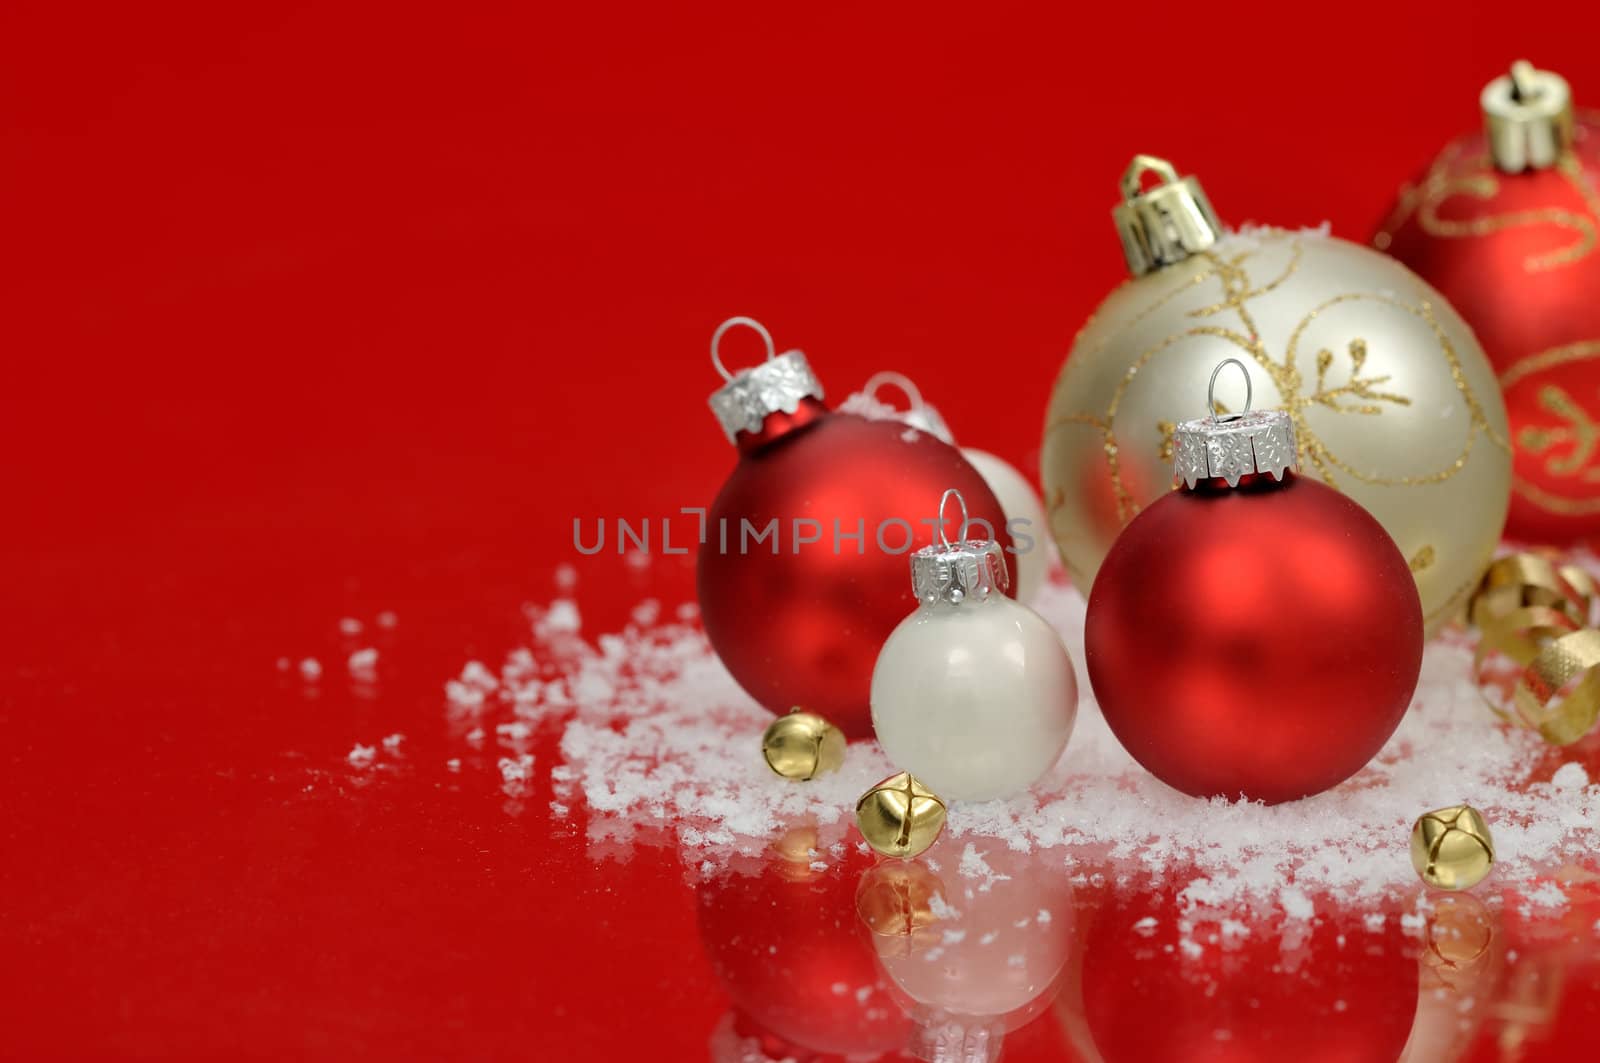 Christmas decorations by Hbak